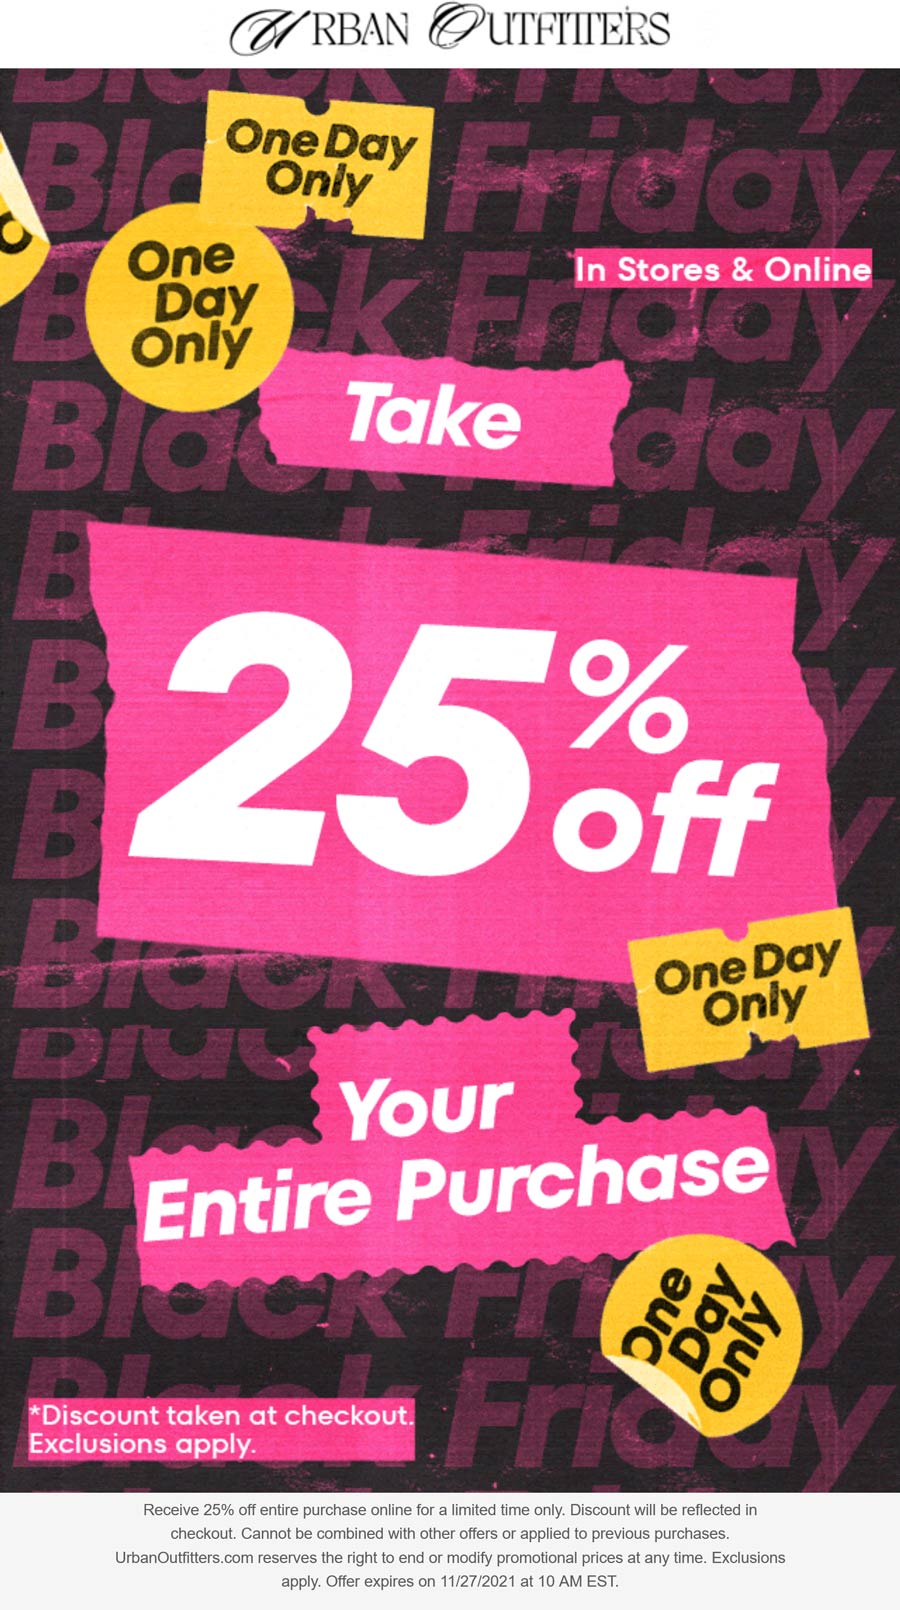 Urban Outfitters stores Coupon  25% off everything today at Urban Outfitters, ditto online #urbanoutfitters 